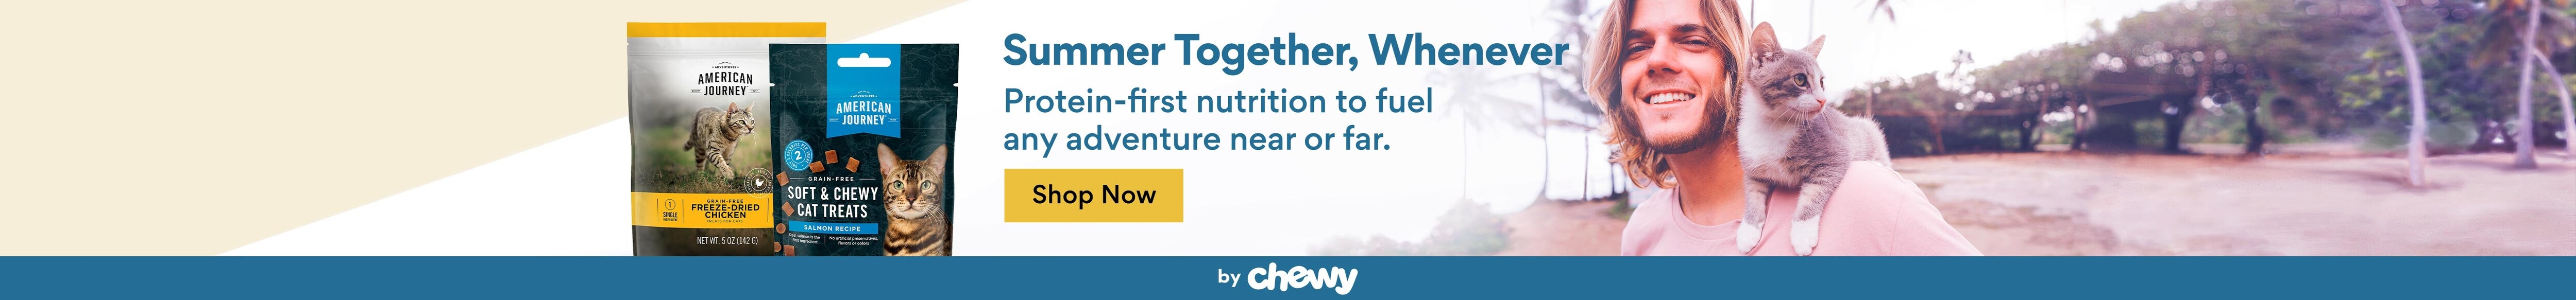 American Journey Summer Together, Wherever. Protein-first nutrition to fuel any adventure near or far.